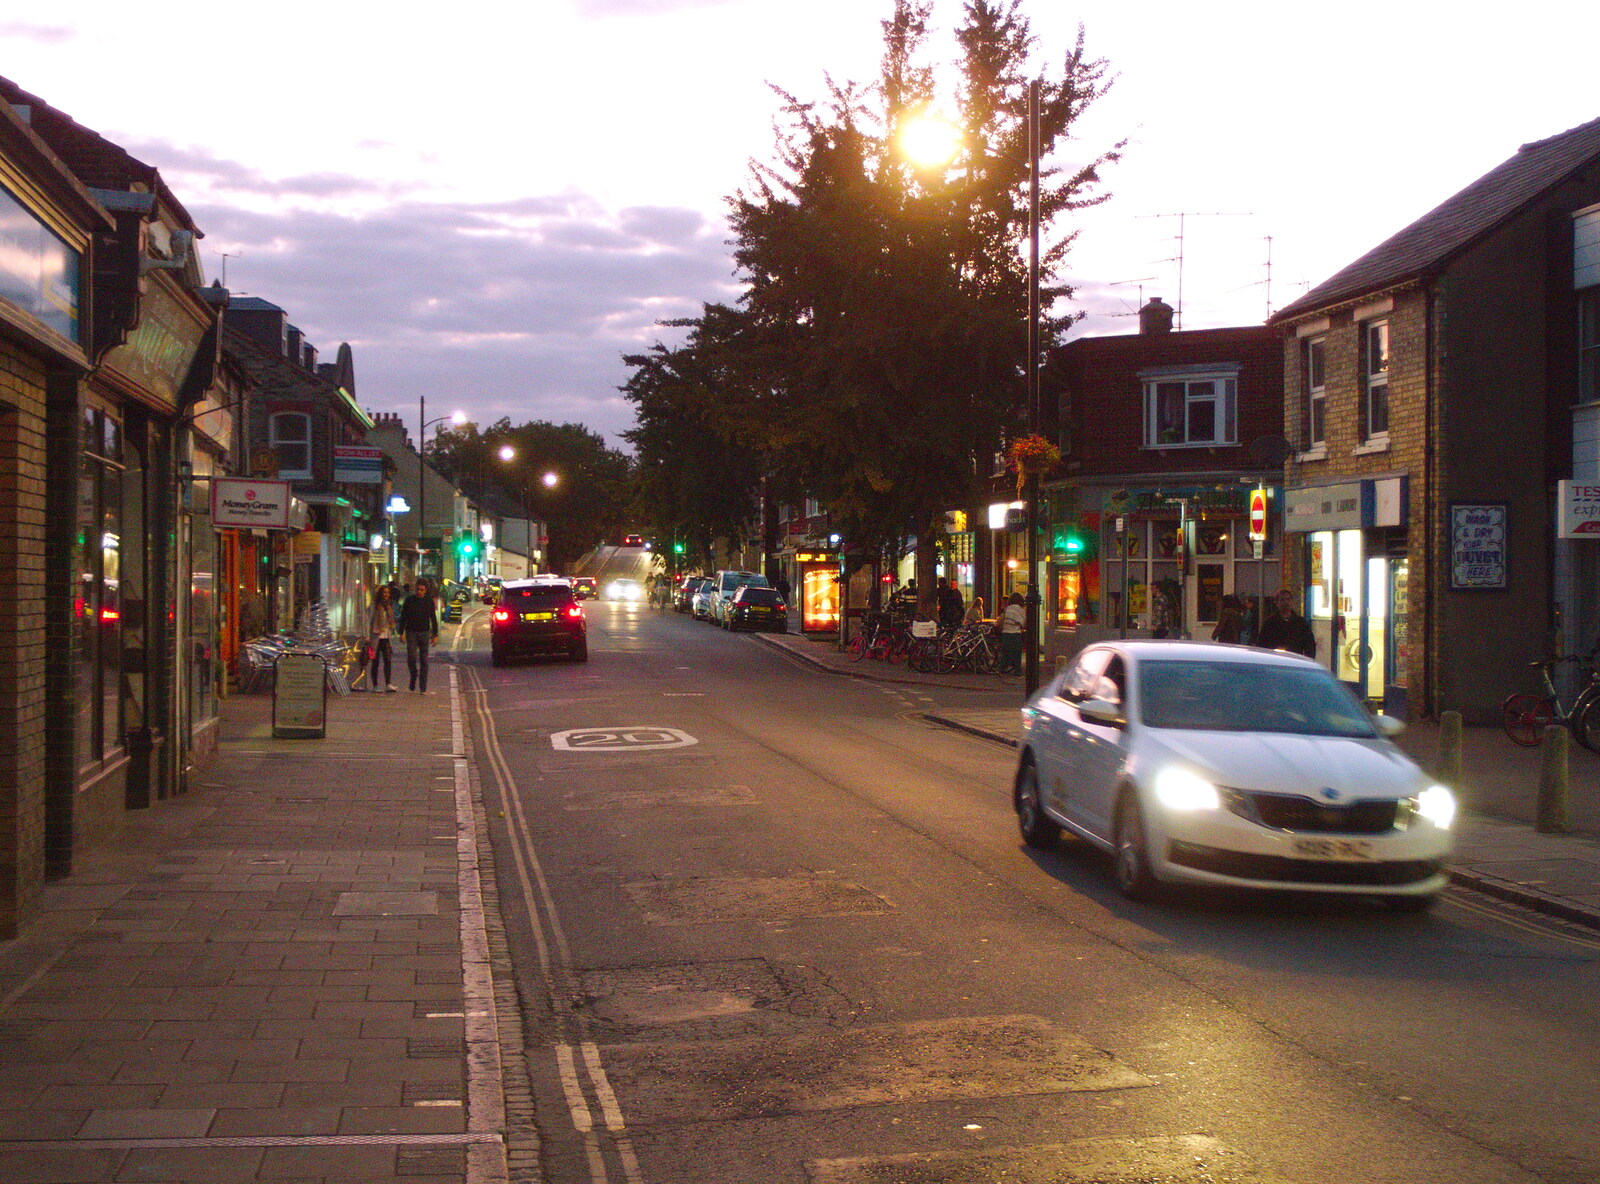 Mill Road in the dusk from A Musical Night on Mill Road, Cambridge - 8th September 2019